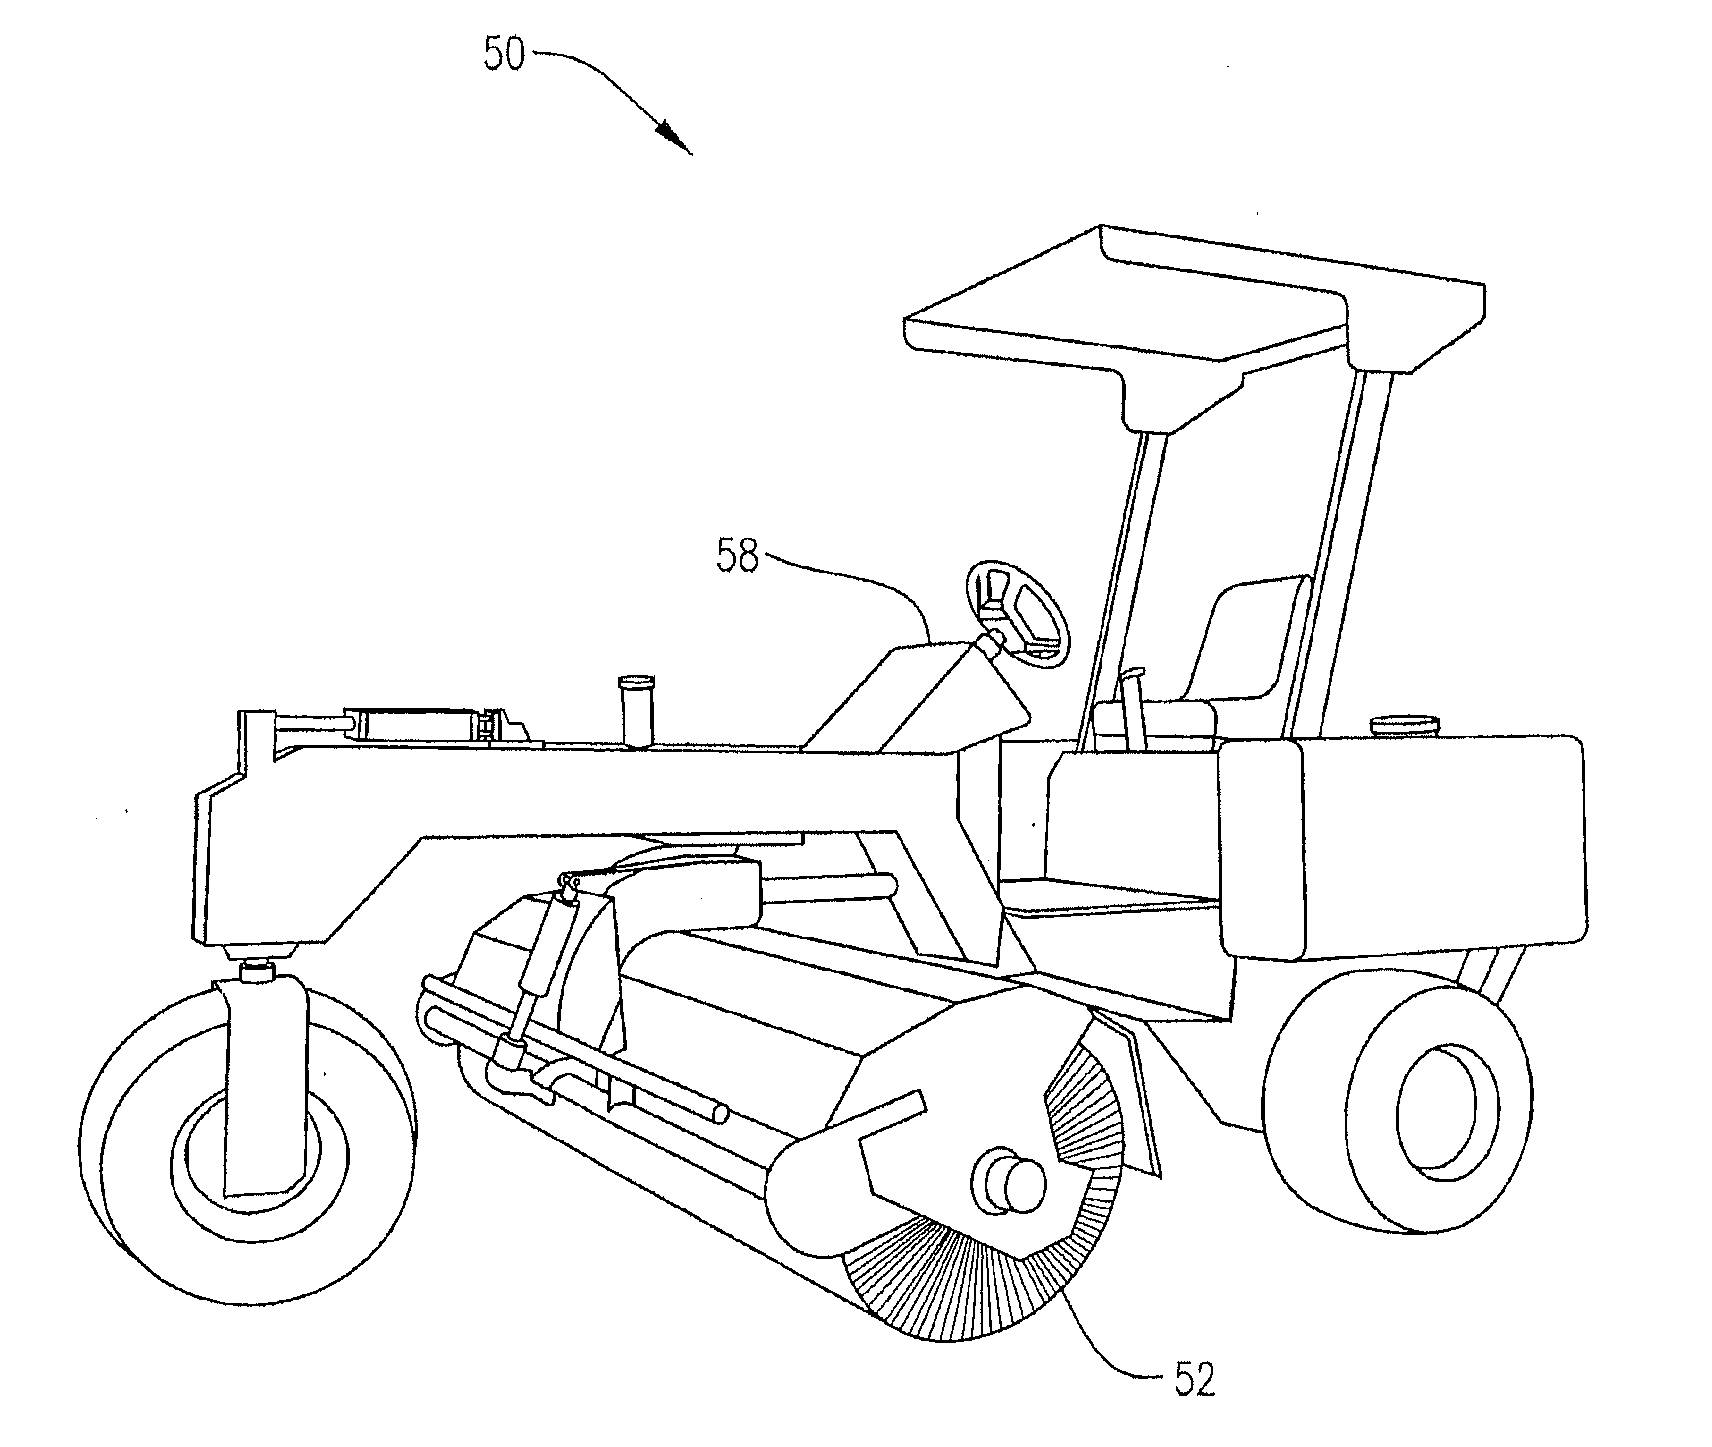 Hydraulic control system for use with a turf sweeper